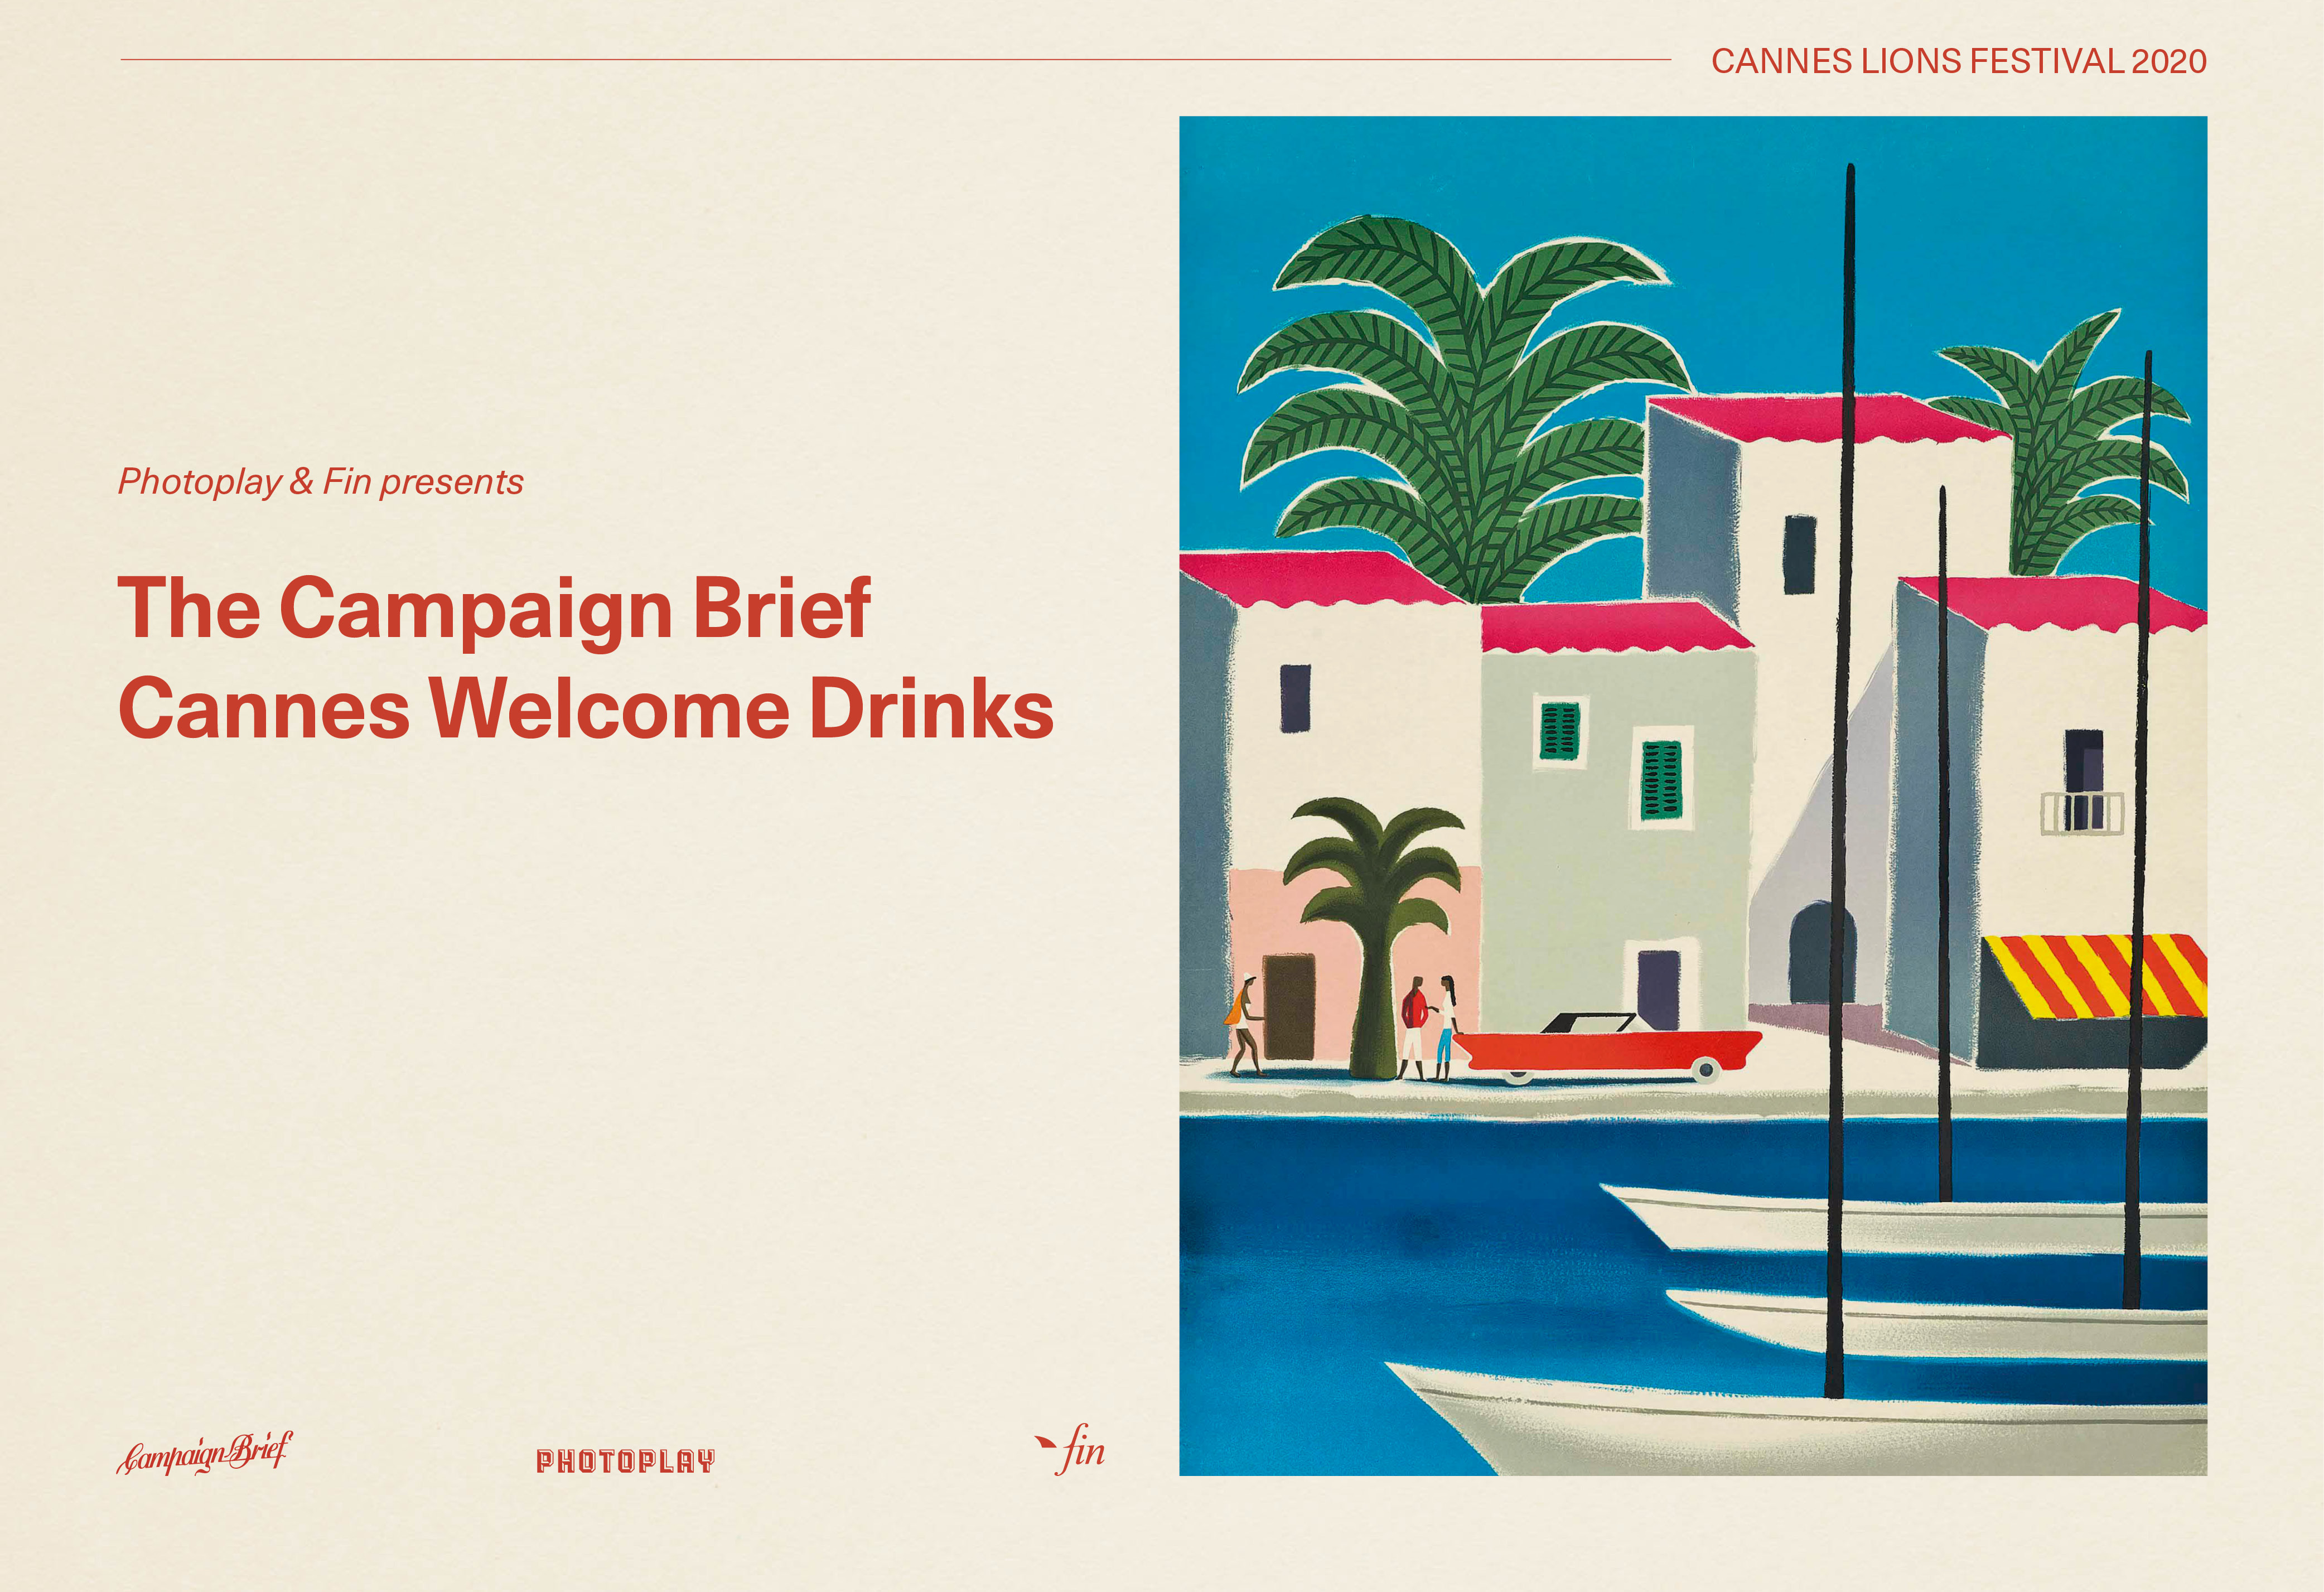 An Aussie or Kiwi Going to Cannes? Get Your Invite Now to the Campaign Brief Welcome Drinks